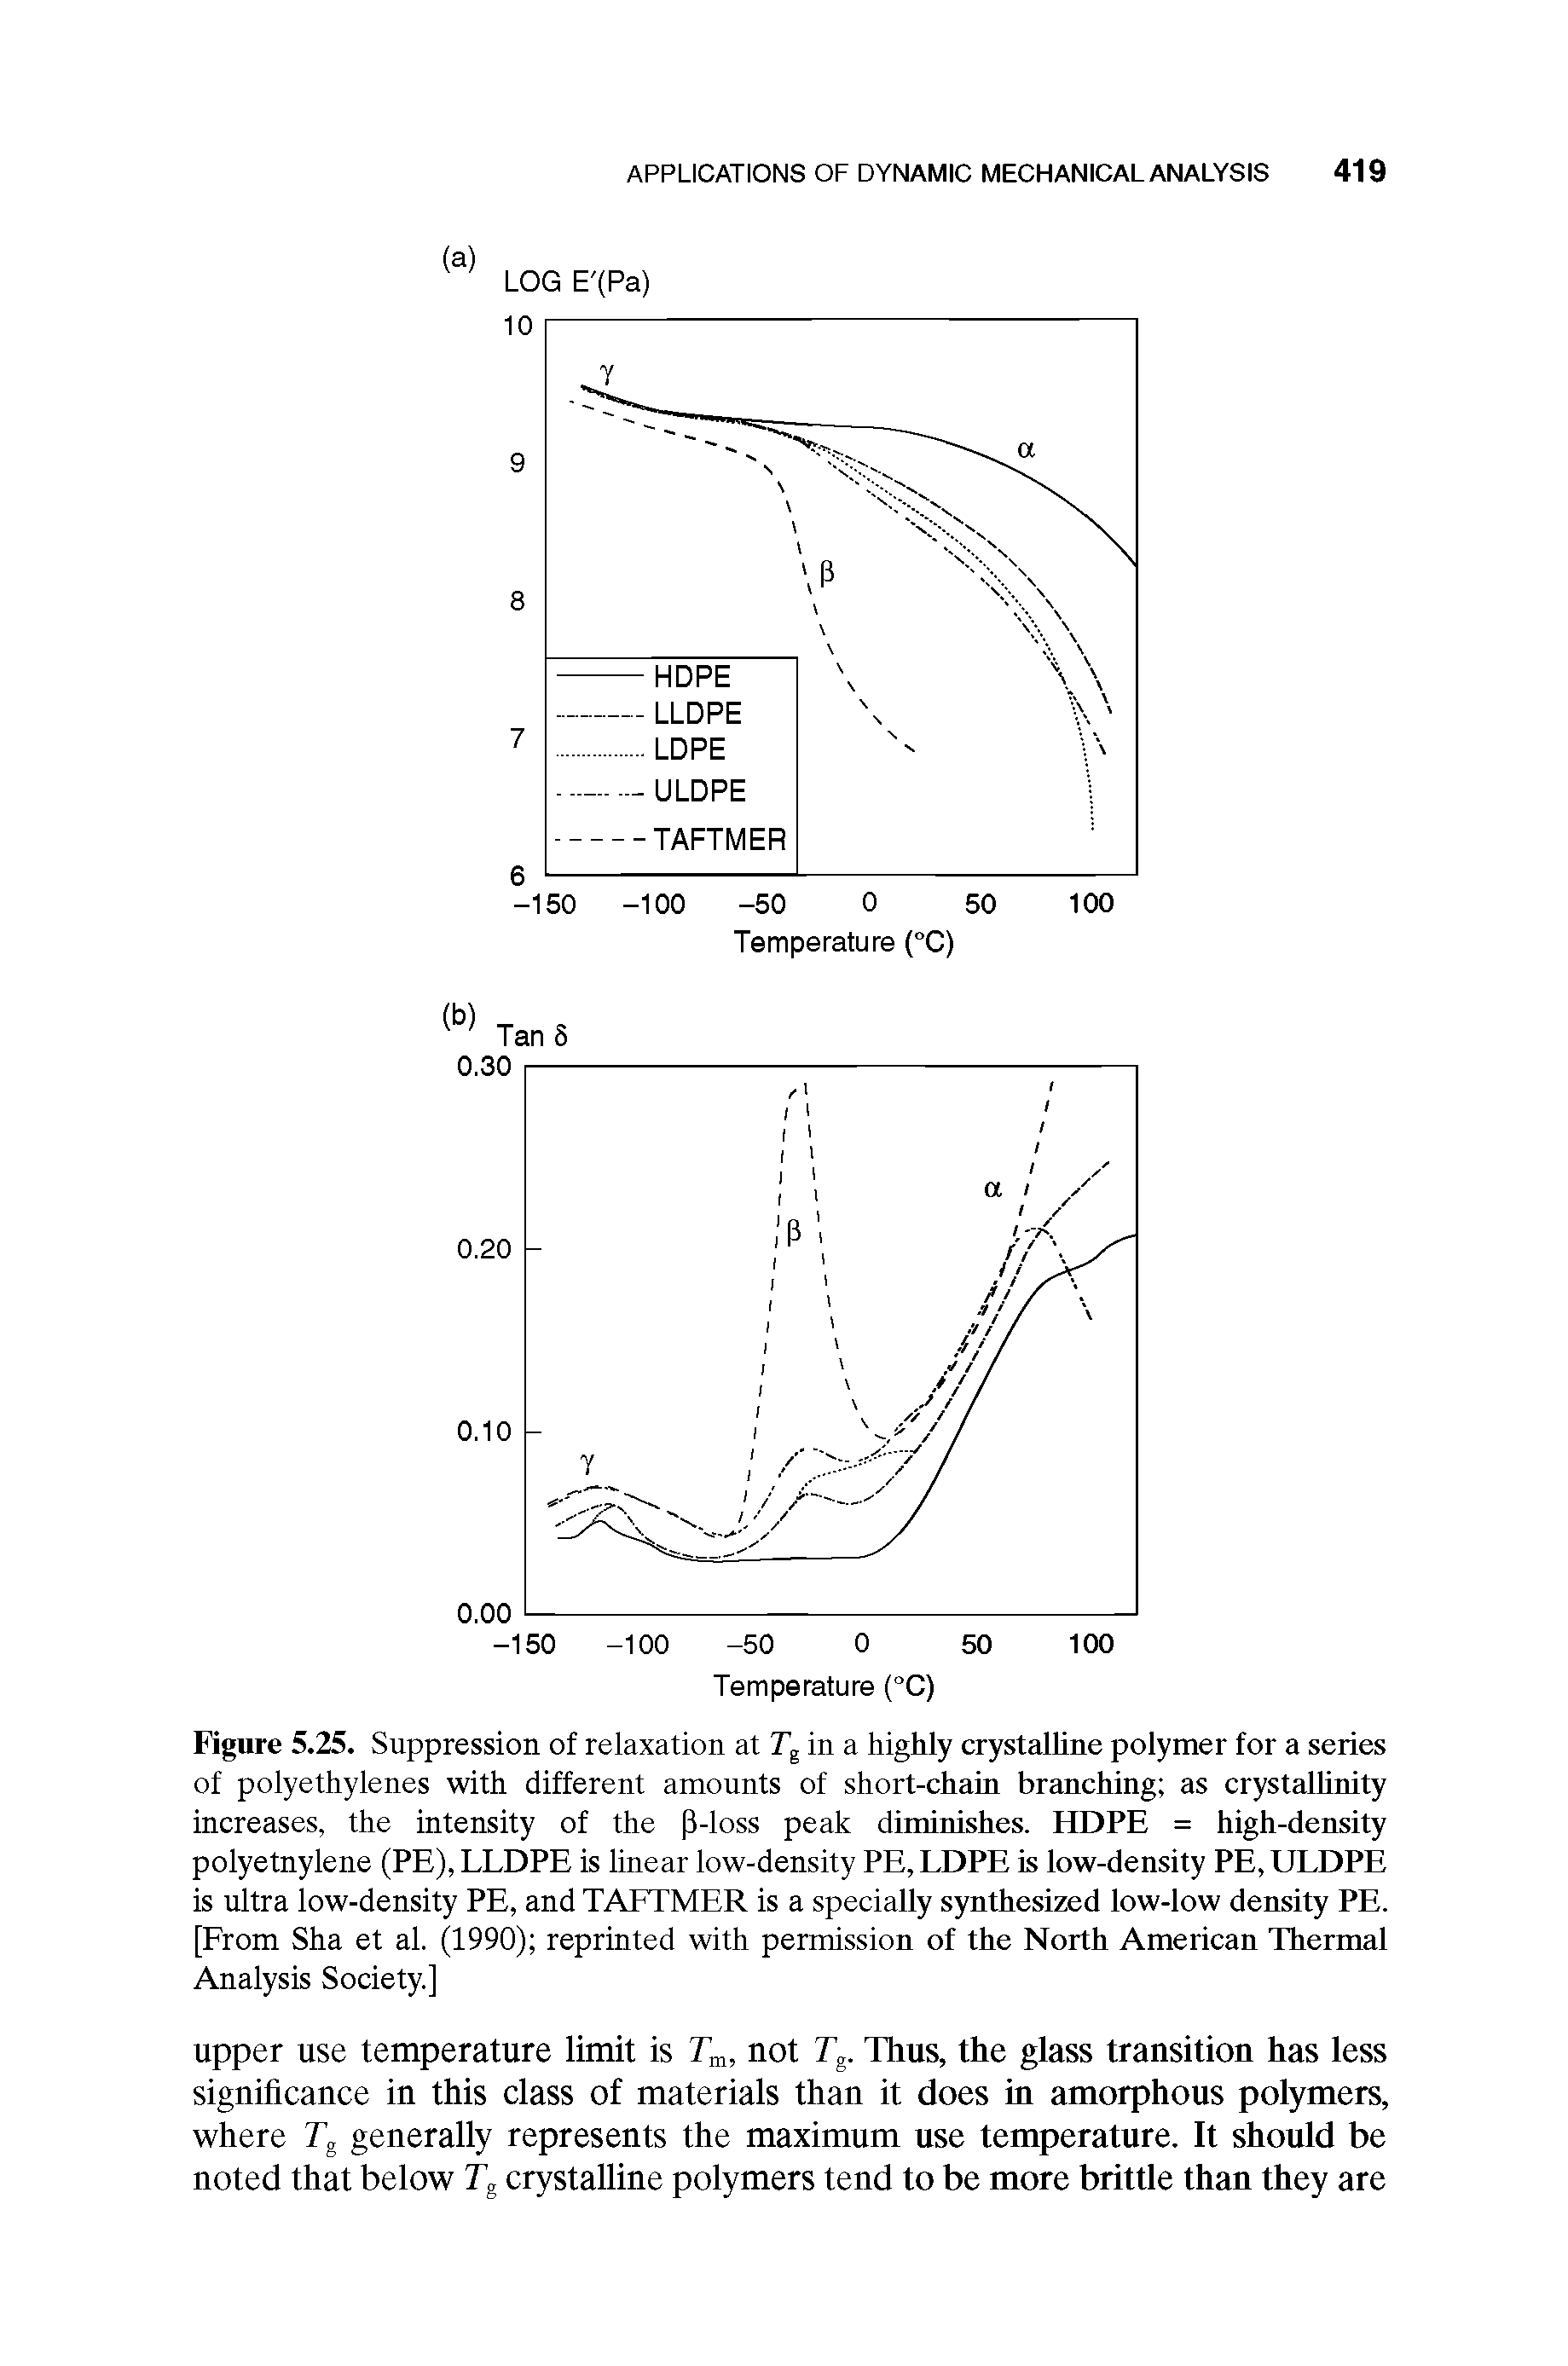 Figure 5.25. Suppression of relaxation at Tg in a highly crystalline polymer for a series of polyethylenes with different amounts of short-chain branching as crystallinity increases, the intensity of the P-loss peak diminishes. HOPE = high-density polyetnylene (PE), LLDPE is linear low-density PE, LDPE is low-density PE, ULDPE is ultra low-density PE, and TAFTMER is a specially synthesized low-low density PE. [From Sha et al. (1990) reprinted with permission of the North American Thermal Analysis Society.]...